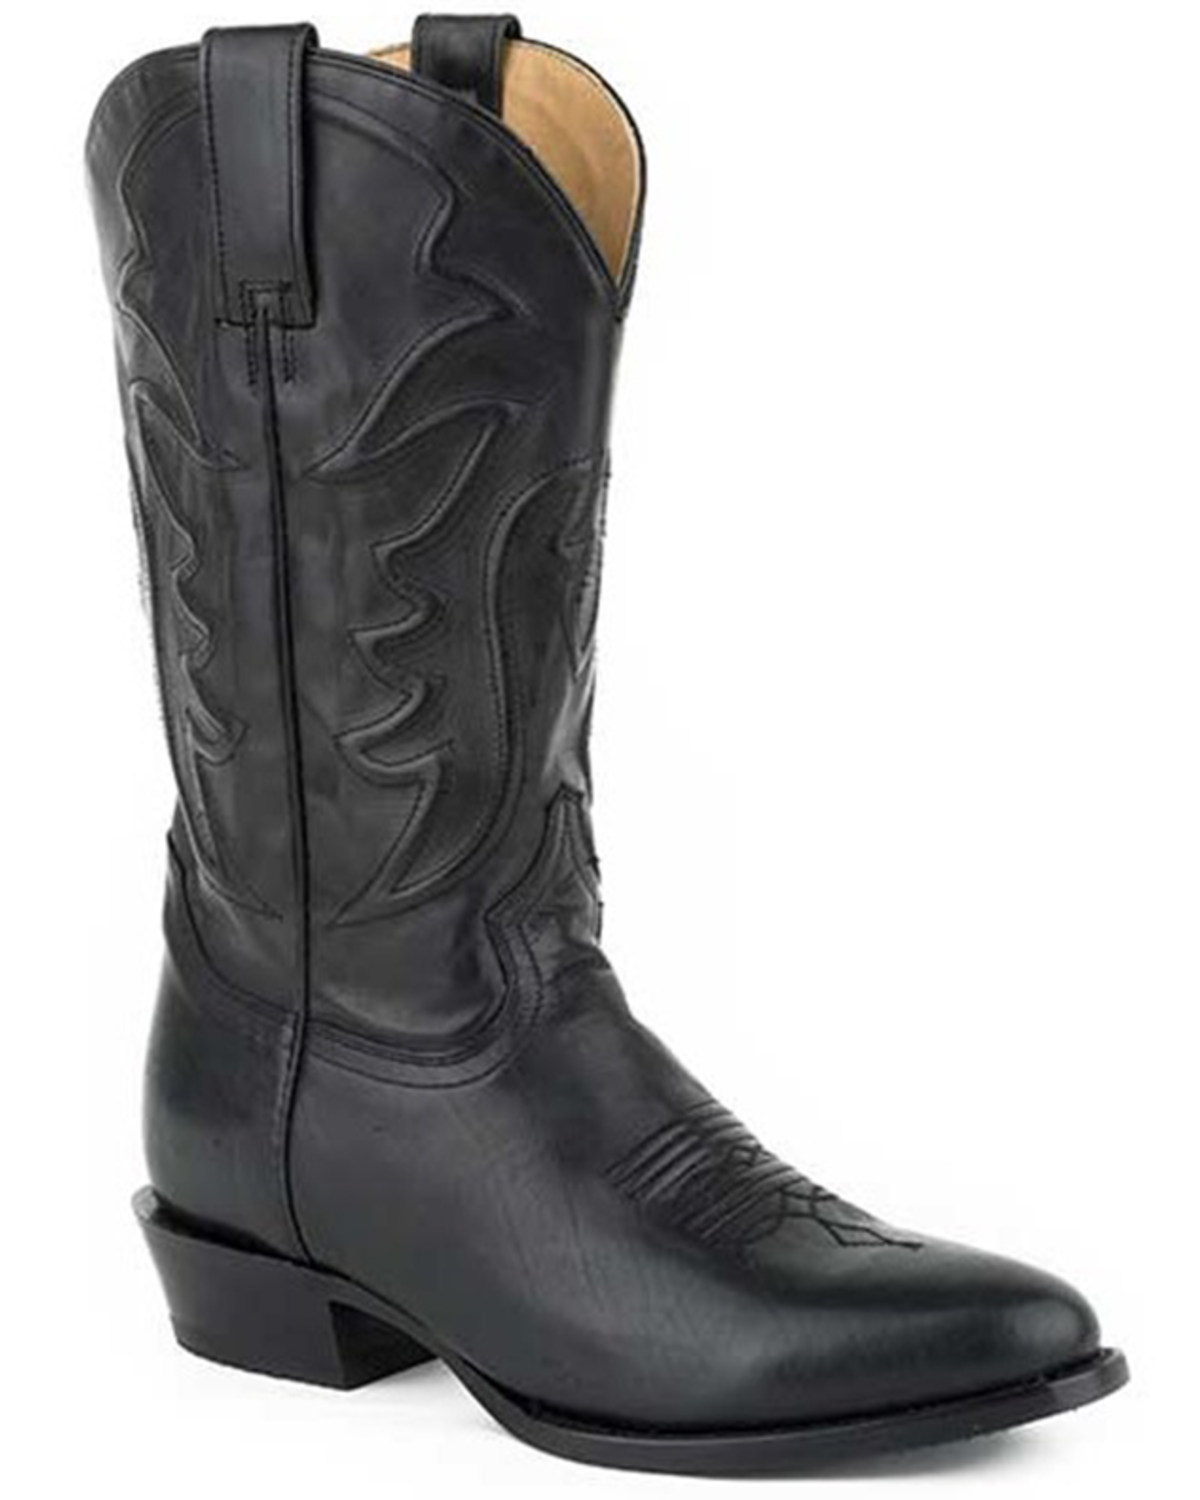 Stetson Men's Ames Corded Shaft Western Boots - Round Toe